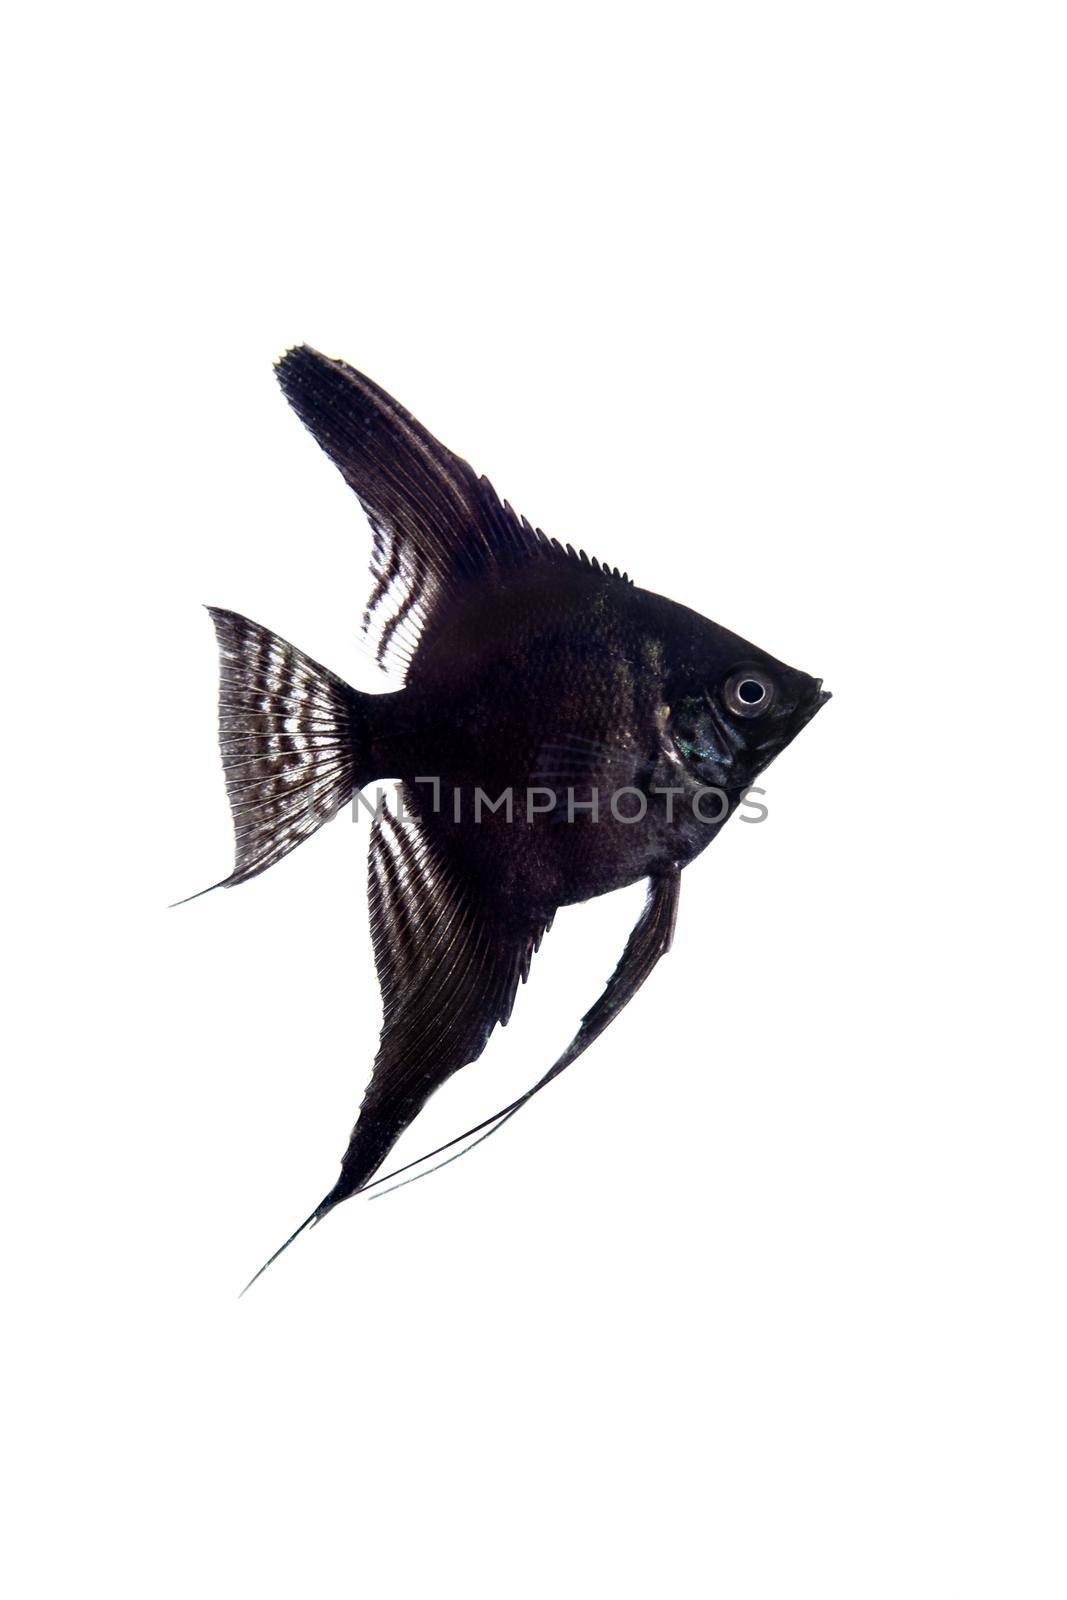 Black angelfish in profile on white background by RosaJay